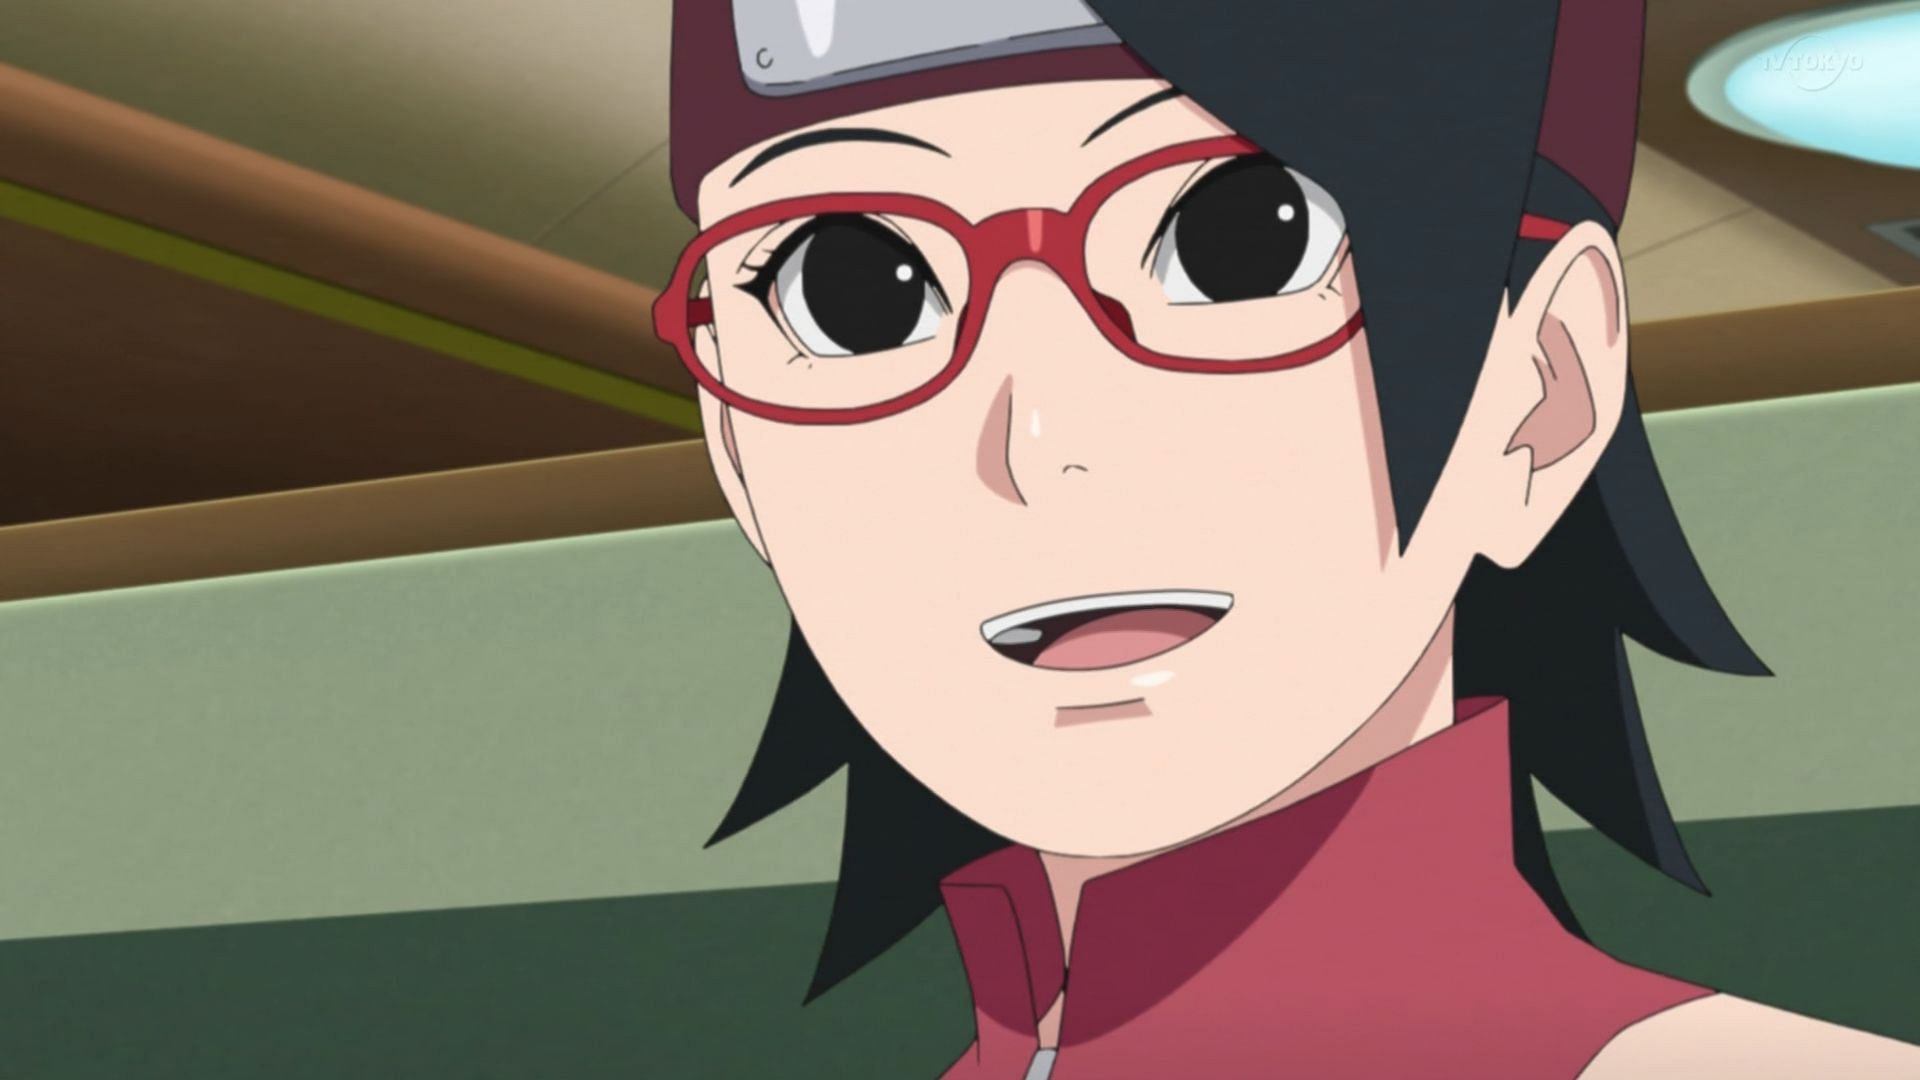 Boruto manga is slowly butchering everything iconic about its characters,  fans riot